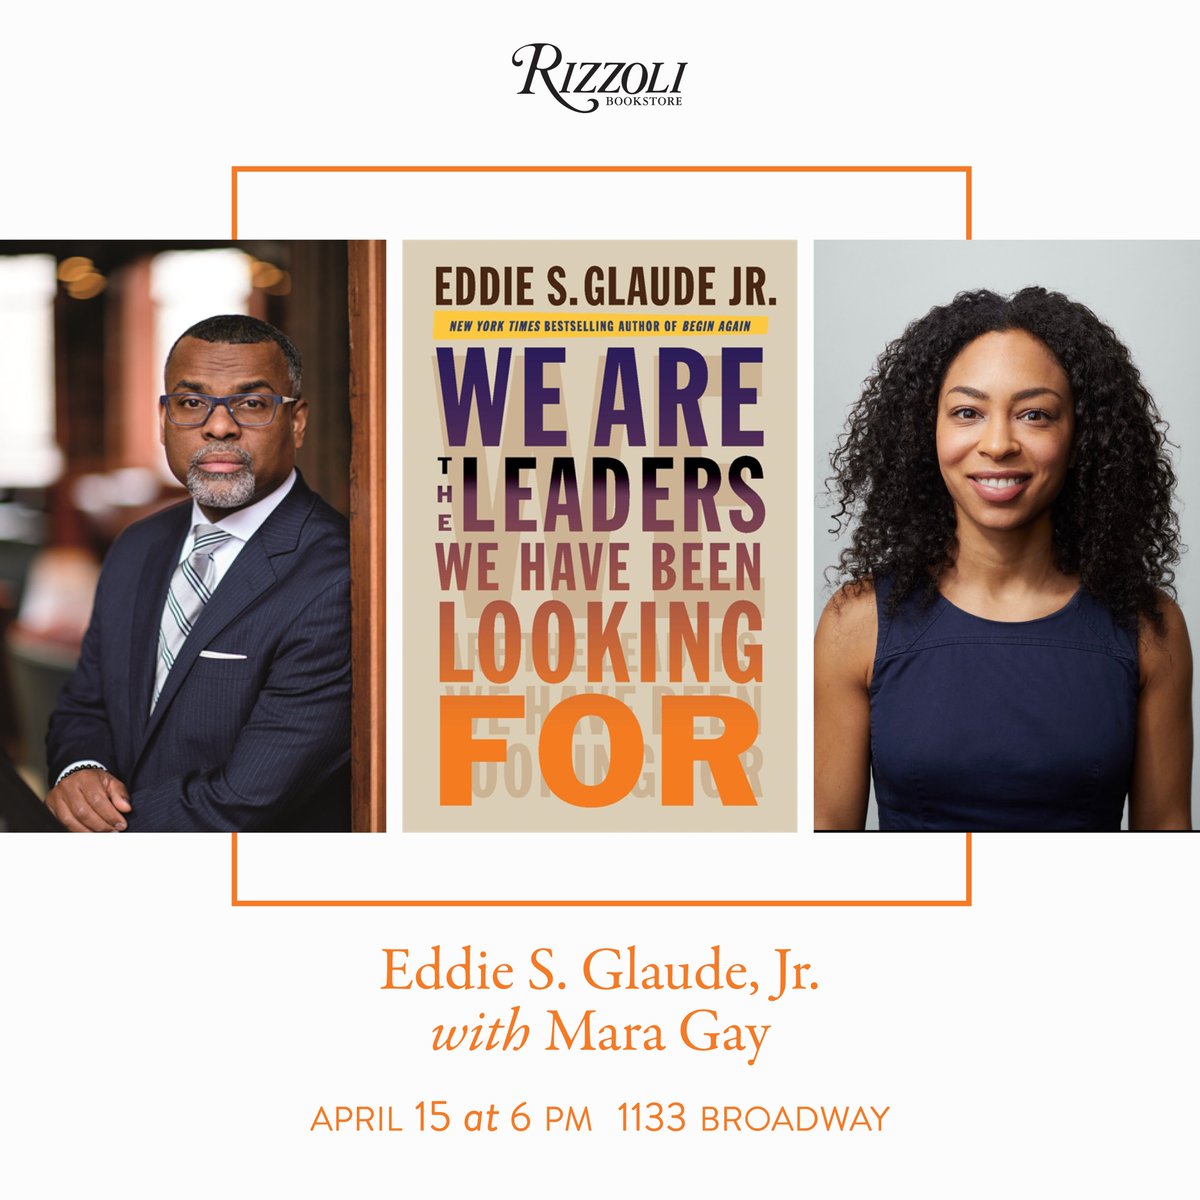 Hello, New York! Join @esglaude at @Rizzoli_Bkstore, where he’ll speak with @nytimes reporter @MaraGay about stepping up to save our democracy. Save your seat: rizzolibookstore.com/we-are-leaders…